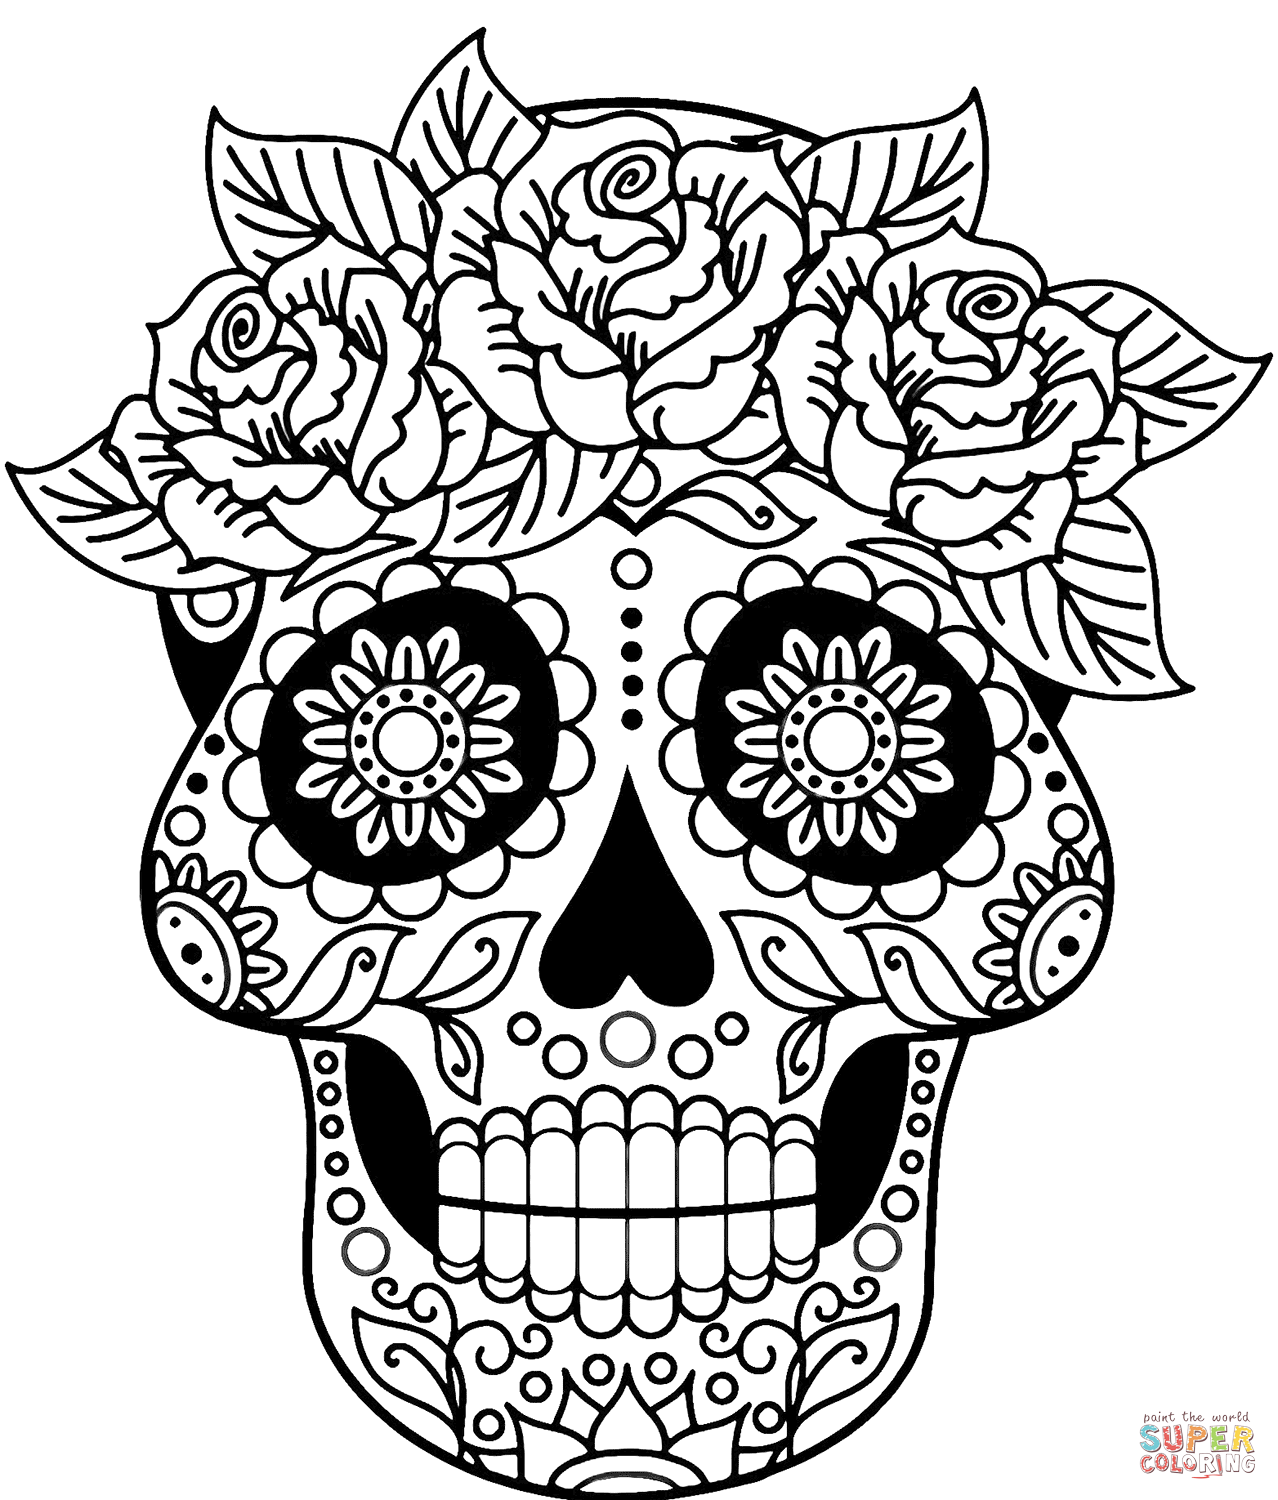 Sugar Skull Coloring Page Free Printable Coloring Pages